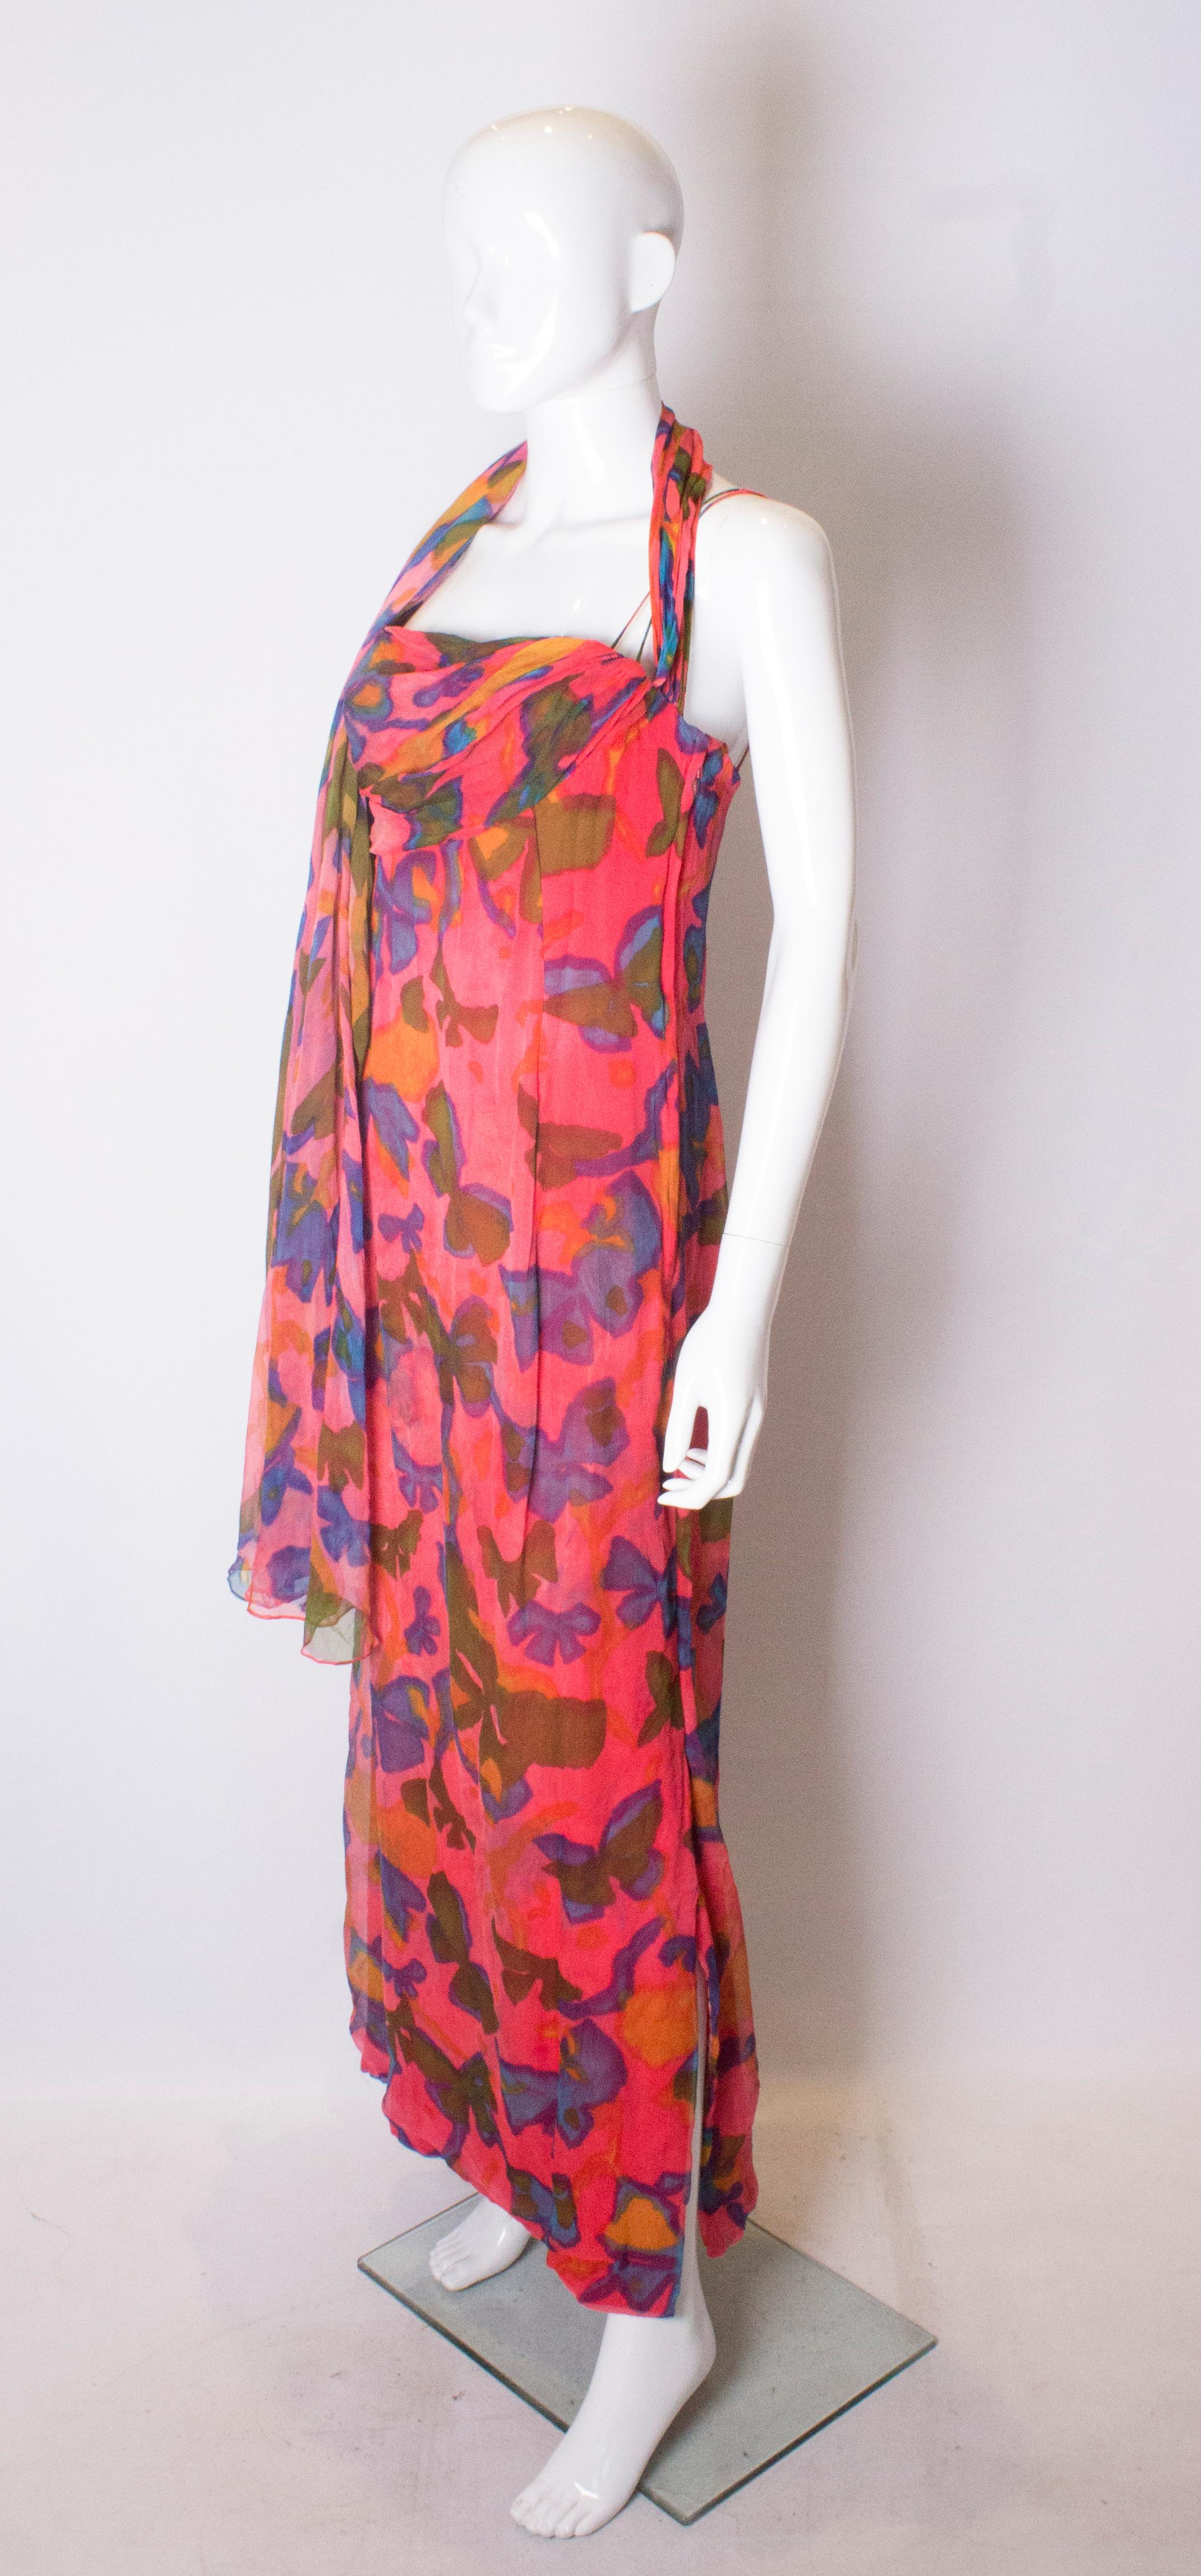 A stunning silk gown by Malcolm Starr. The dress is beautifully made with a boned bodice, double spagetti straps, and an attached scarf. The dress has a pink background with floral print.